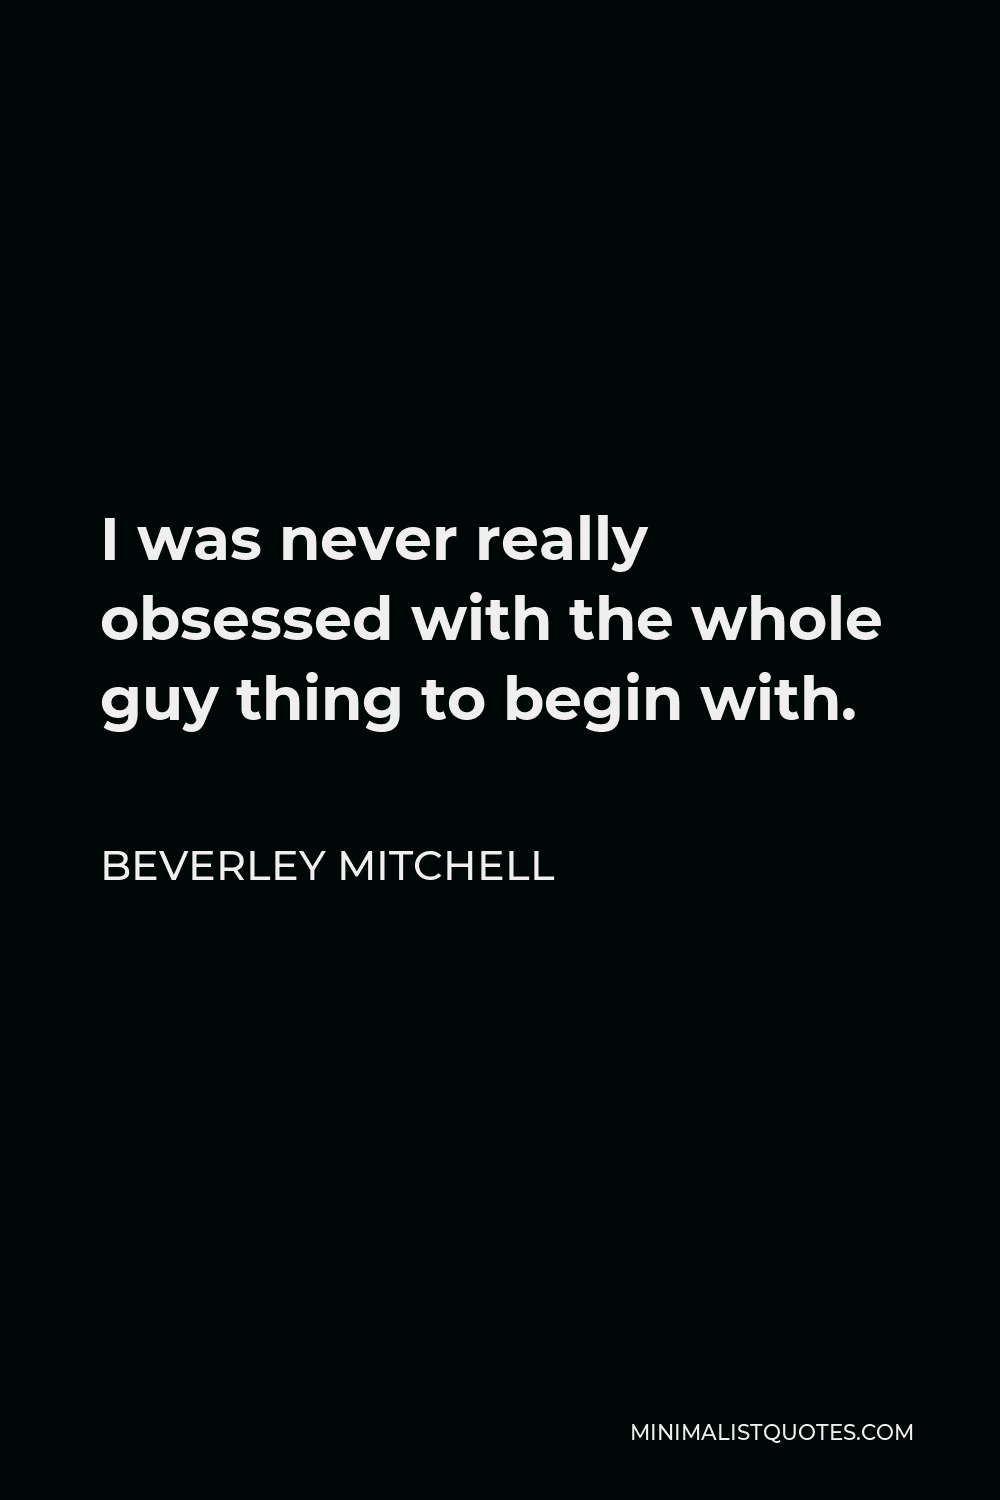 Beverley Mitchell Quote - I was never really obsessed with the whole guy thing to begin with.